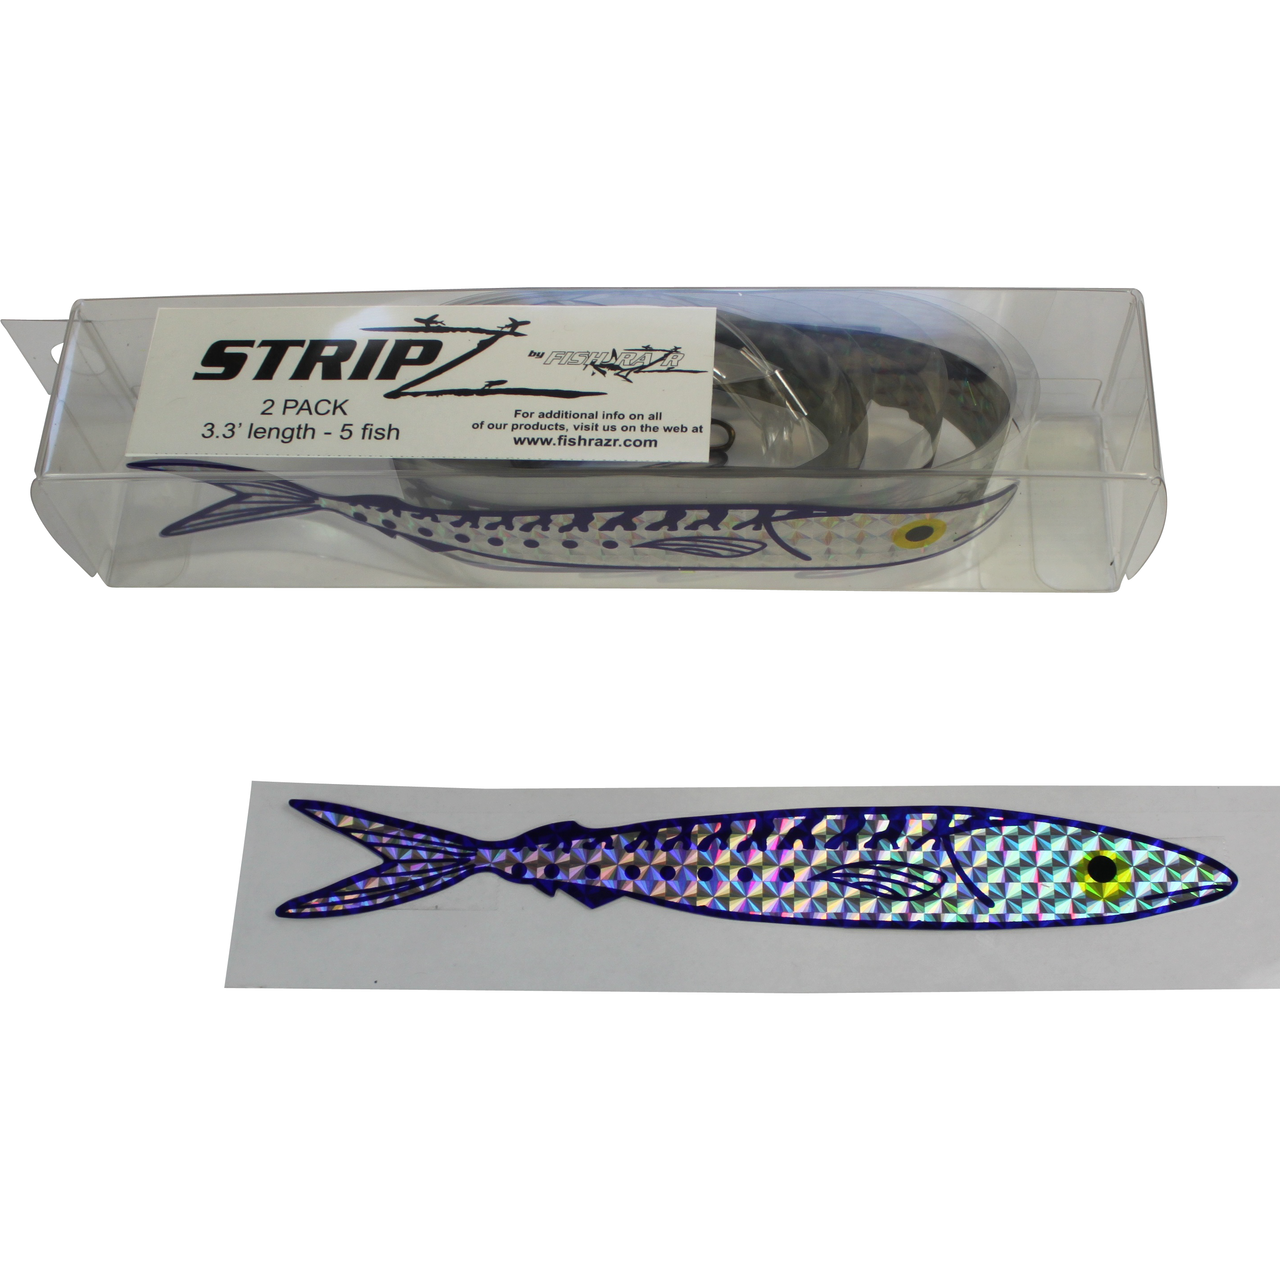 StripZ Replacement Packs Bait fish and Ballyhoo mylar strips